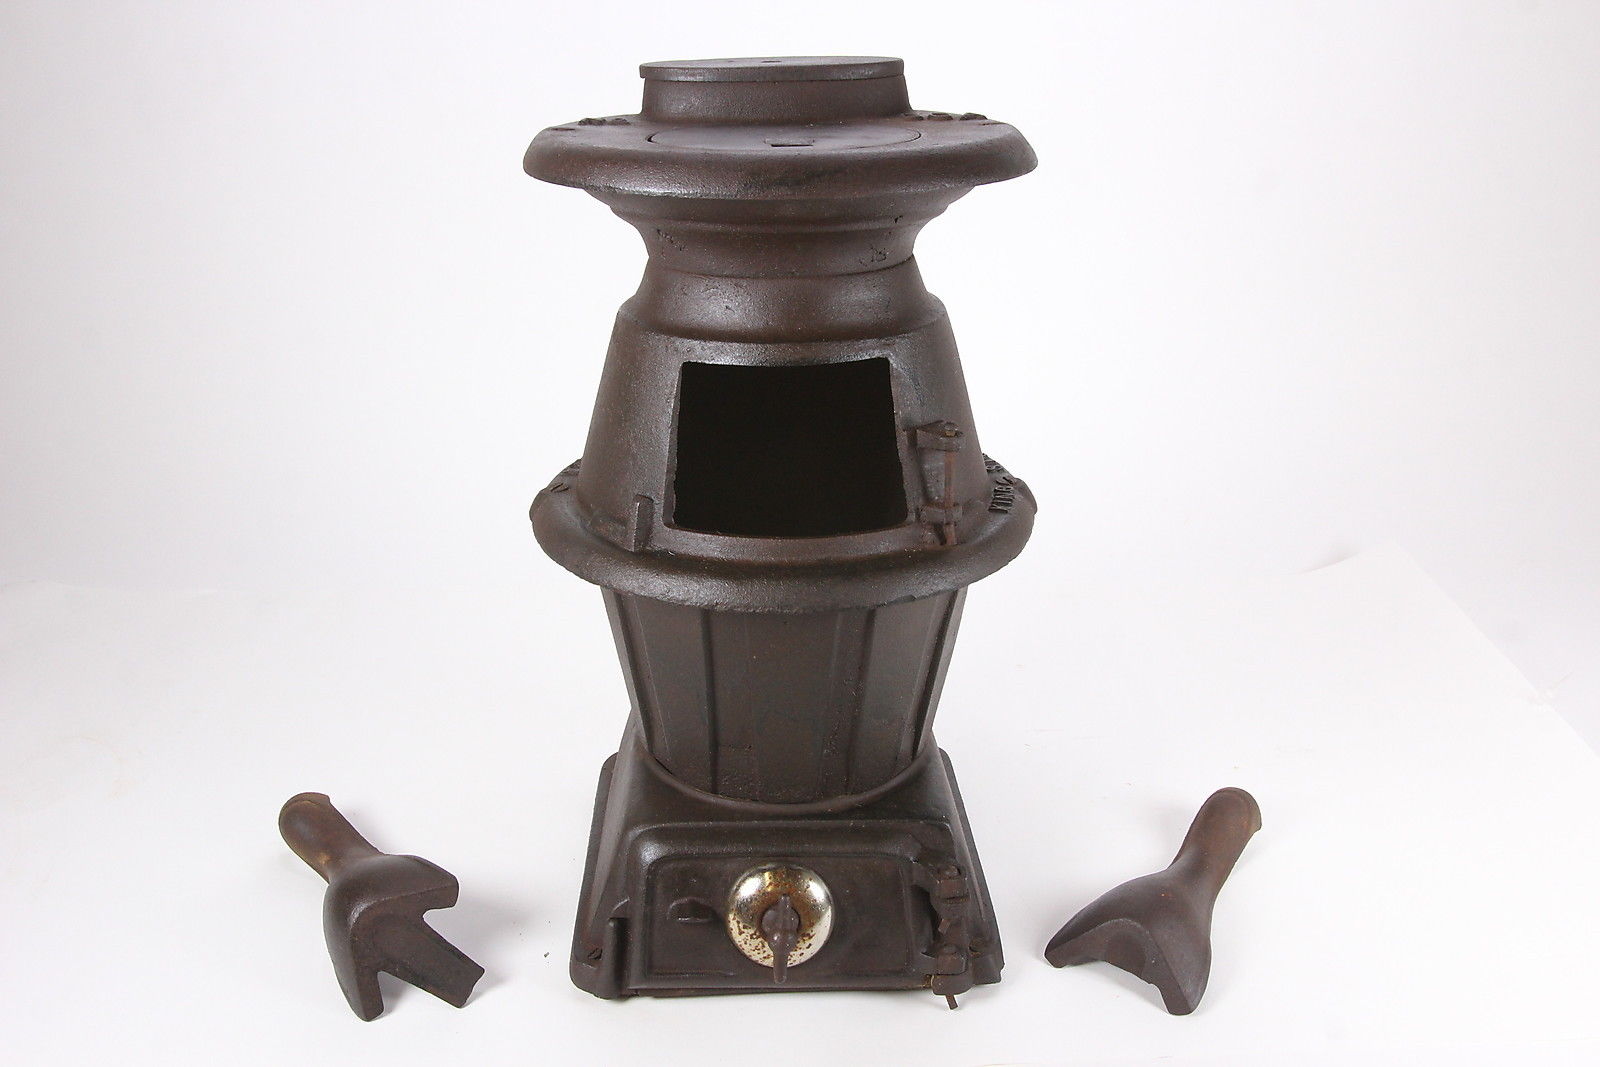 Old Cast Iron King Stove & Range 30A Pot Belly Stove For Parts Or Repair Project